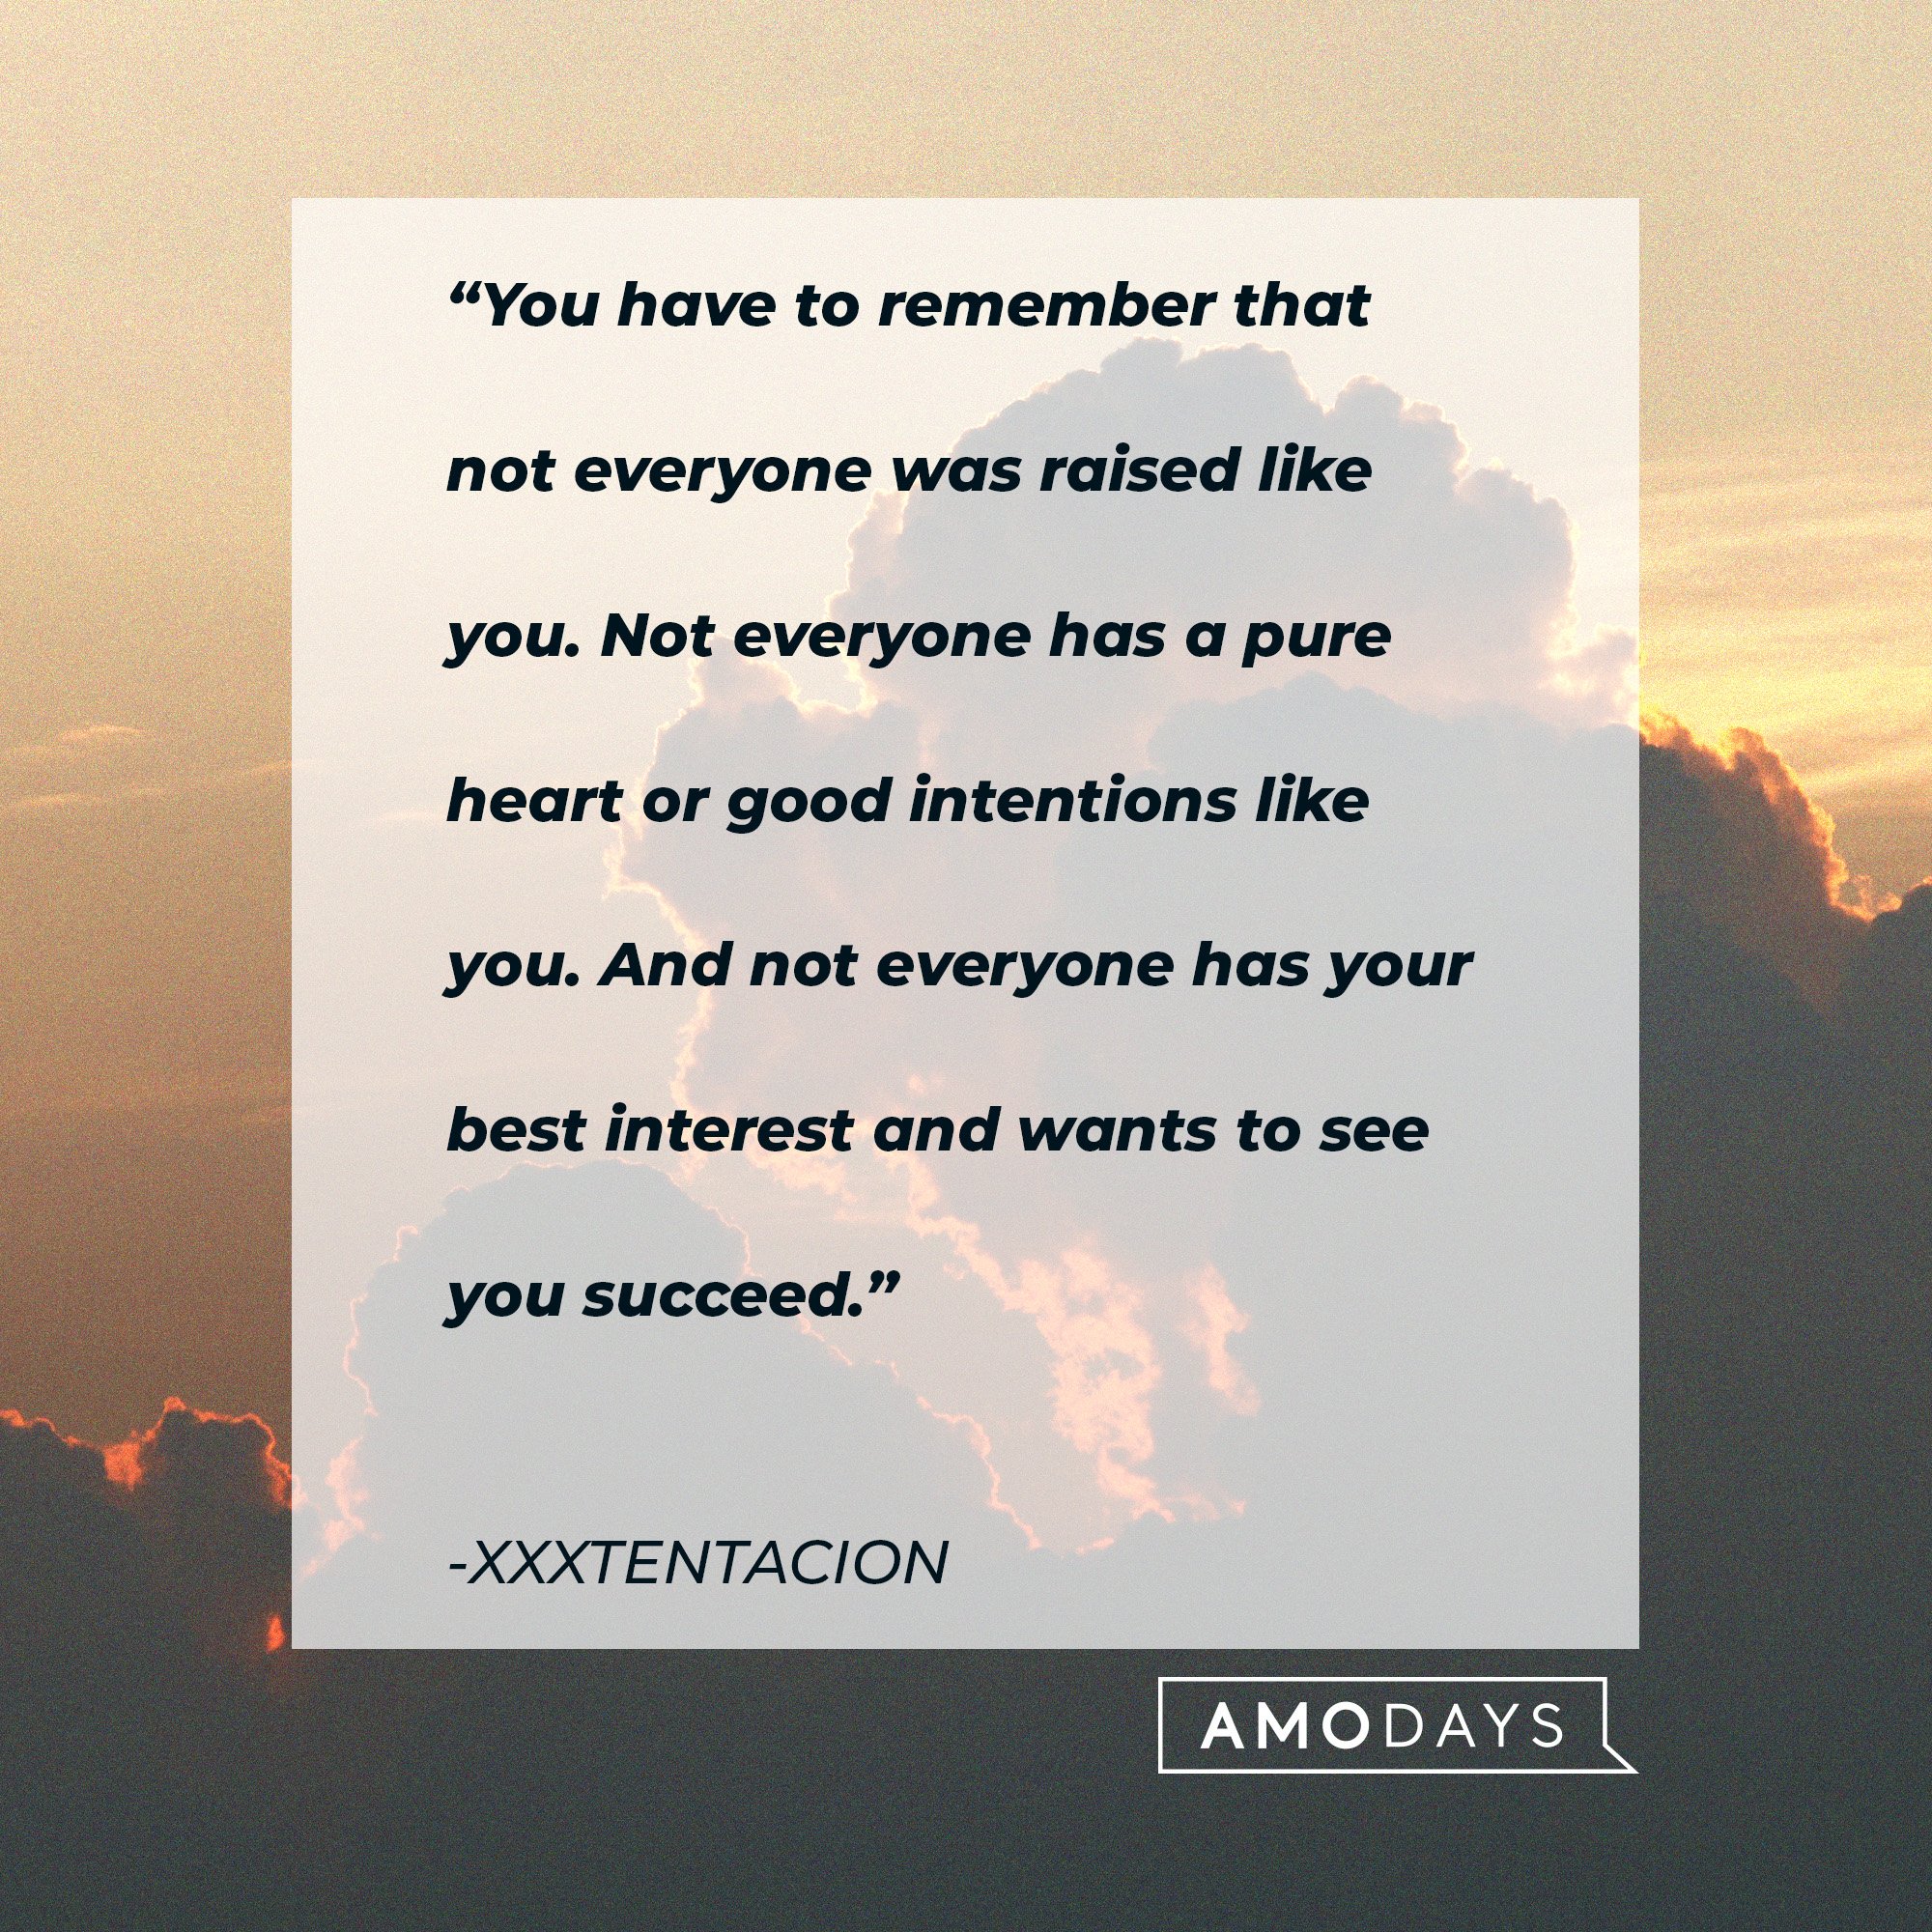 Xxxtentacion’s quote: “You have to remember that not everyone was raised like you. Not everyone has a pure heart or good intentions like you. And not everyone has your best interest and wants to see you succeed.” | Image: AmoDays